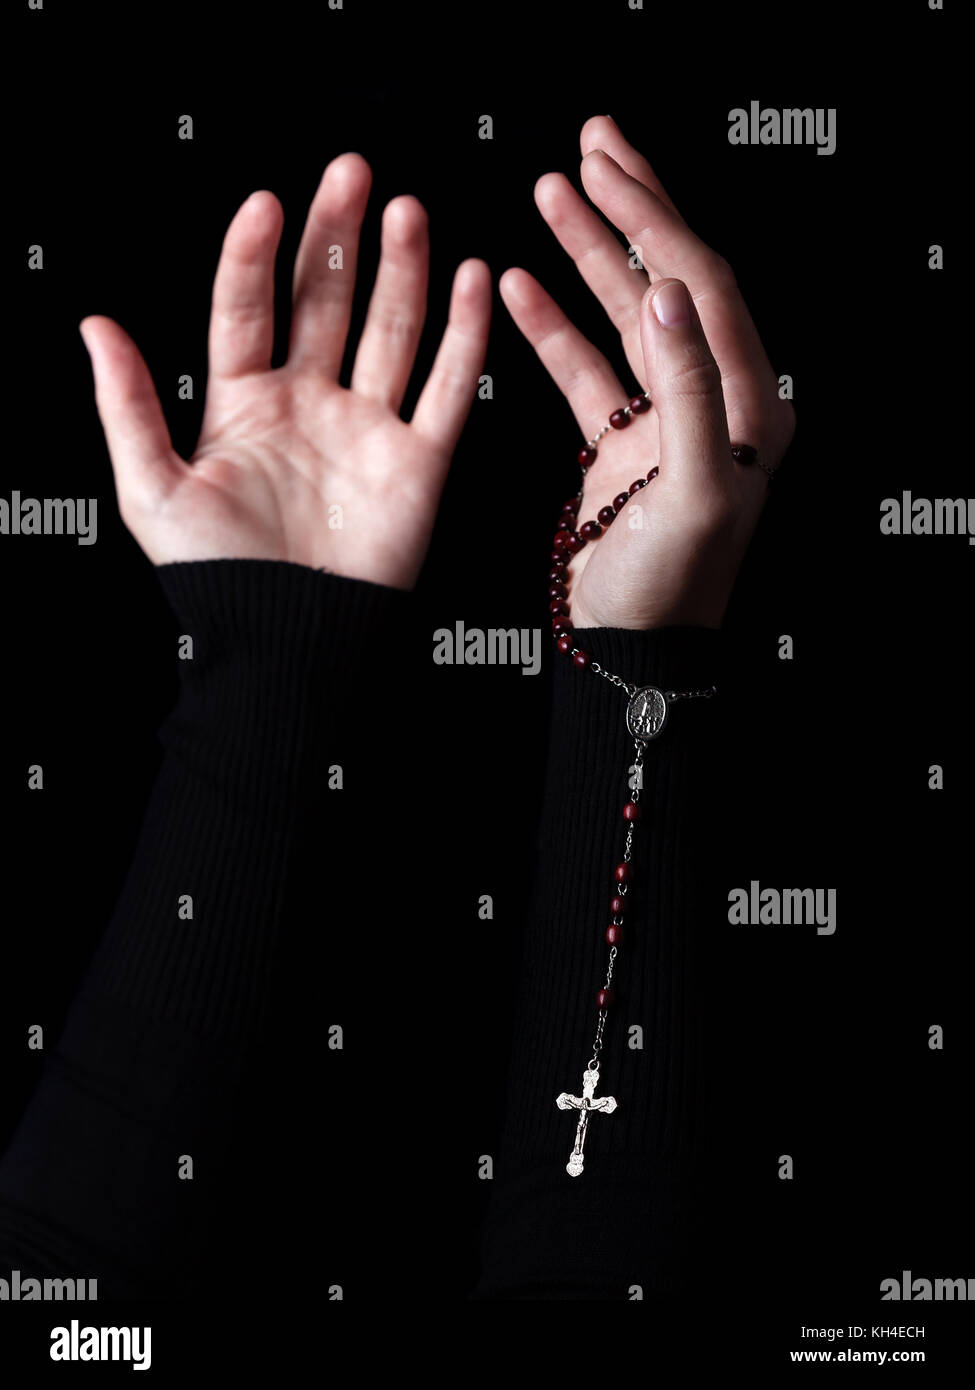 Female hands with arms outstretched praying and holding rosary with cross or Crucifix. Black background. Woman with Christian Catholic hand faith Stock Photo